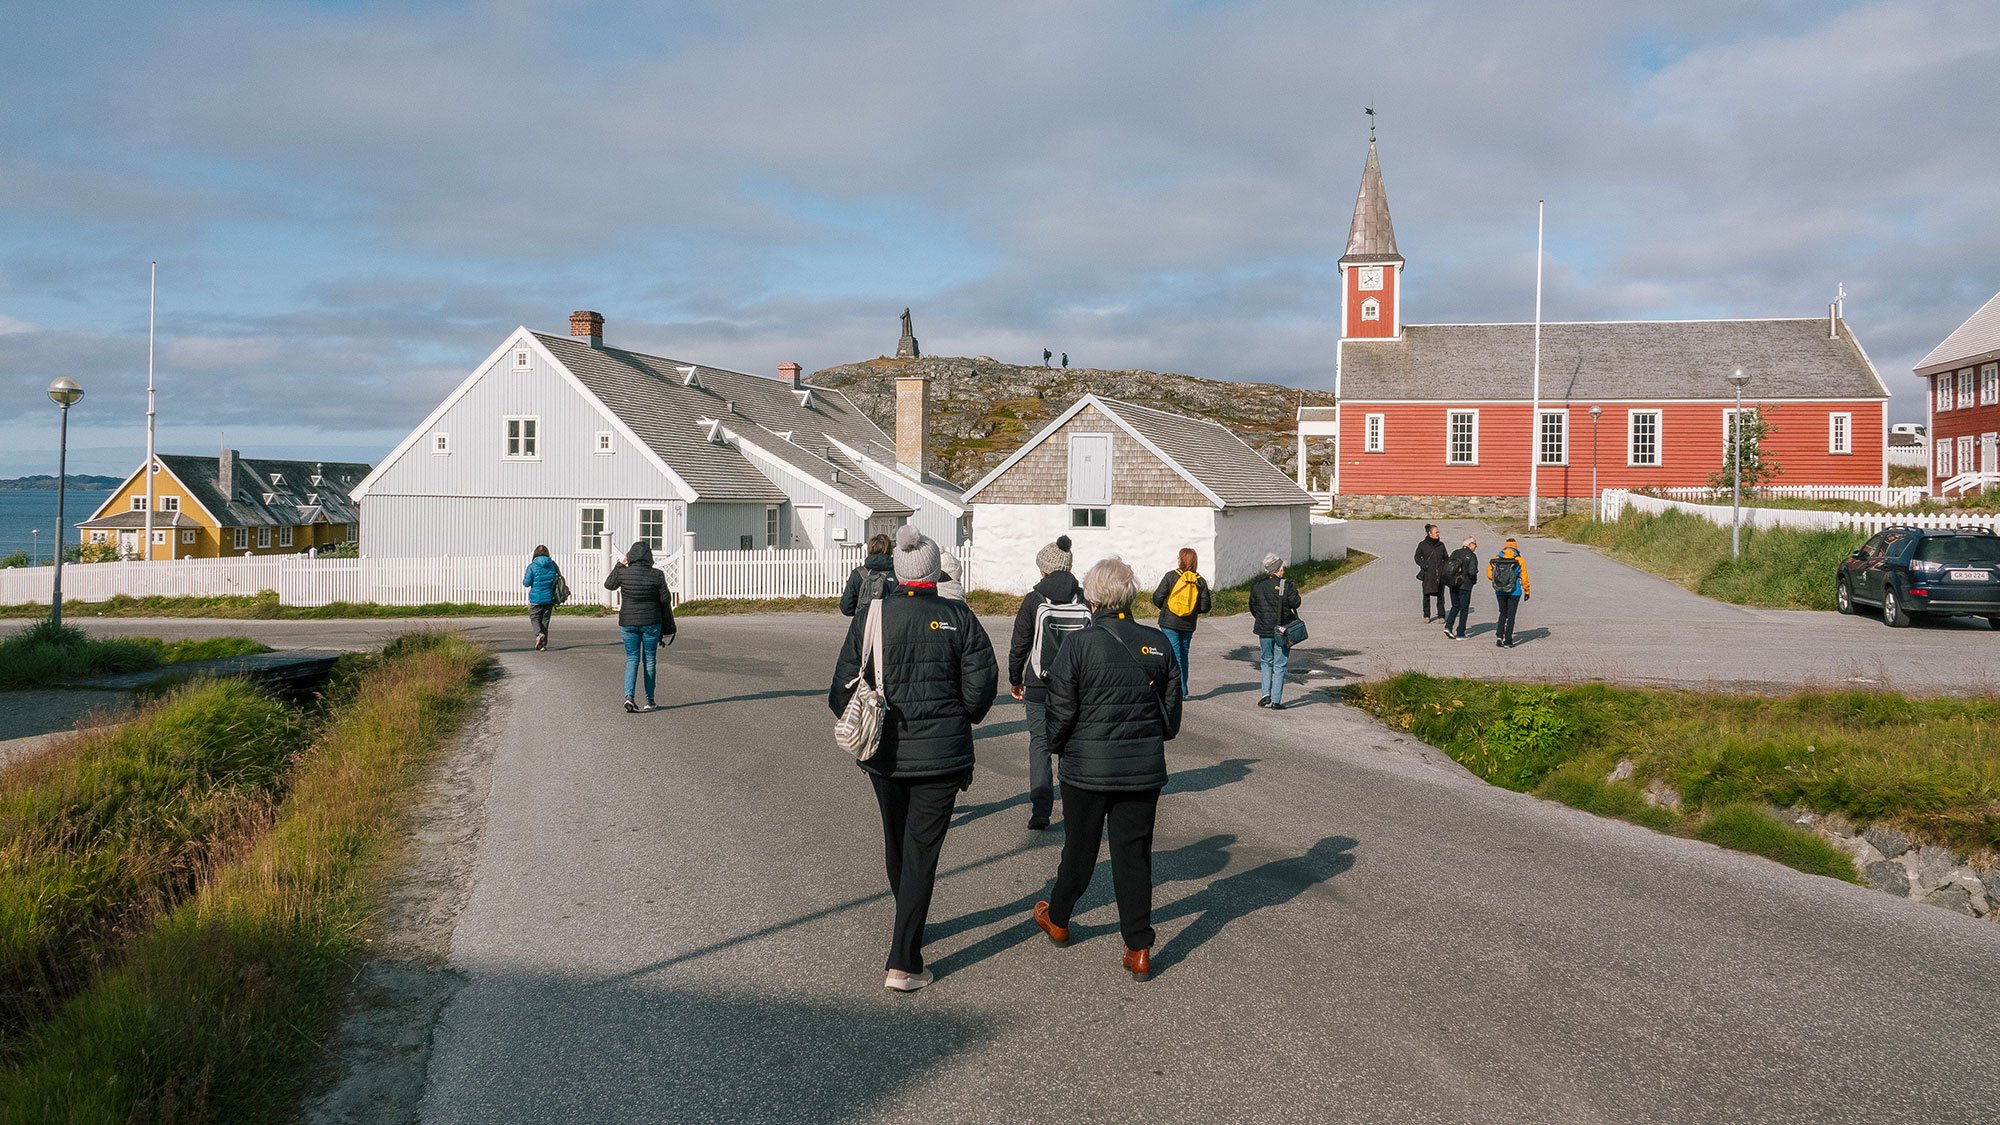 Guests on a Quark Expeditions voyage enjoy a walking tour of Nuuk, the capital of Greenland.